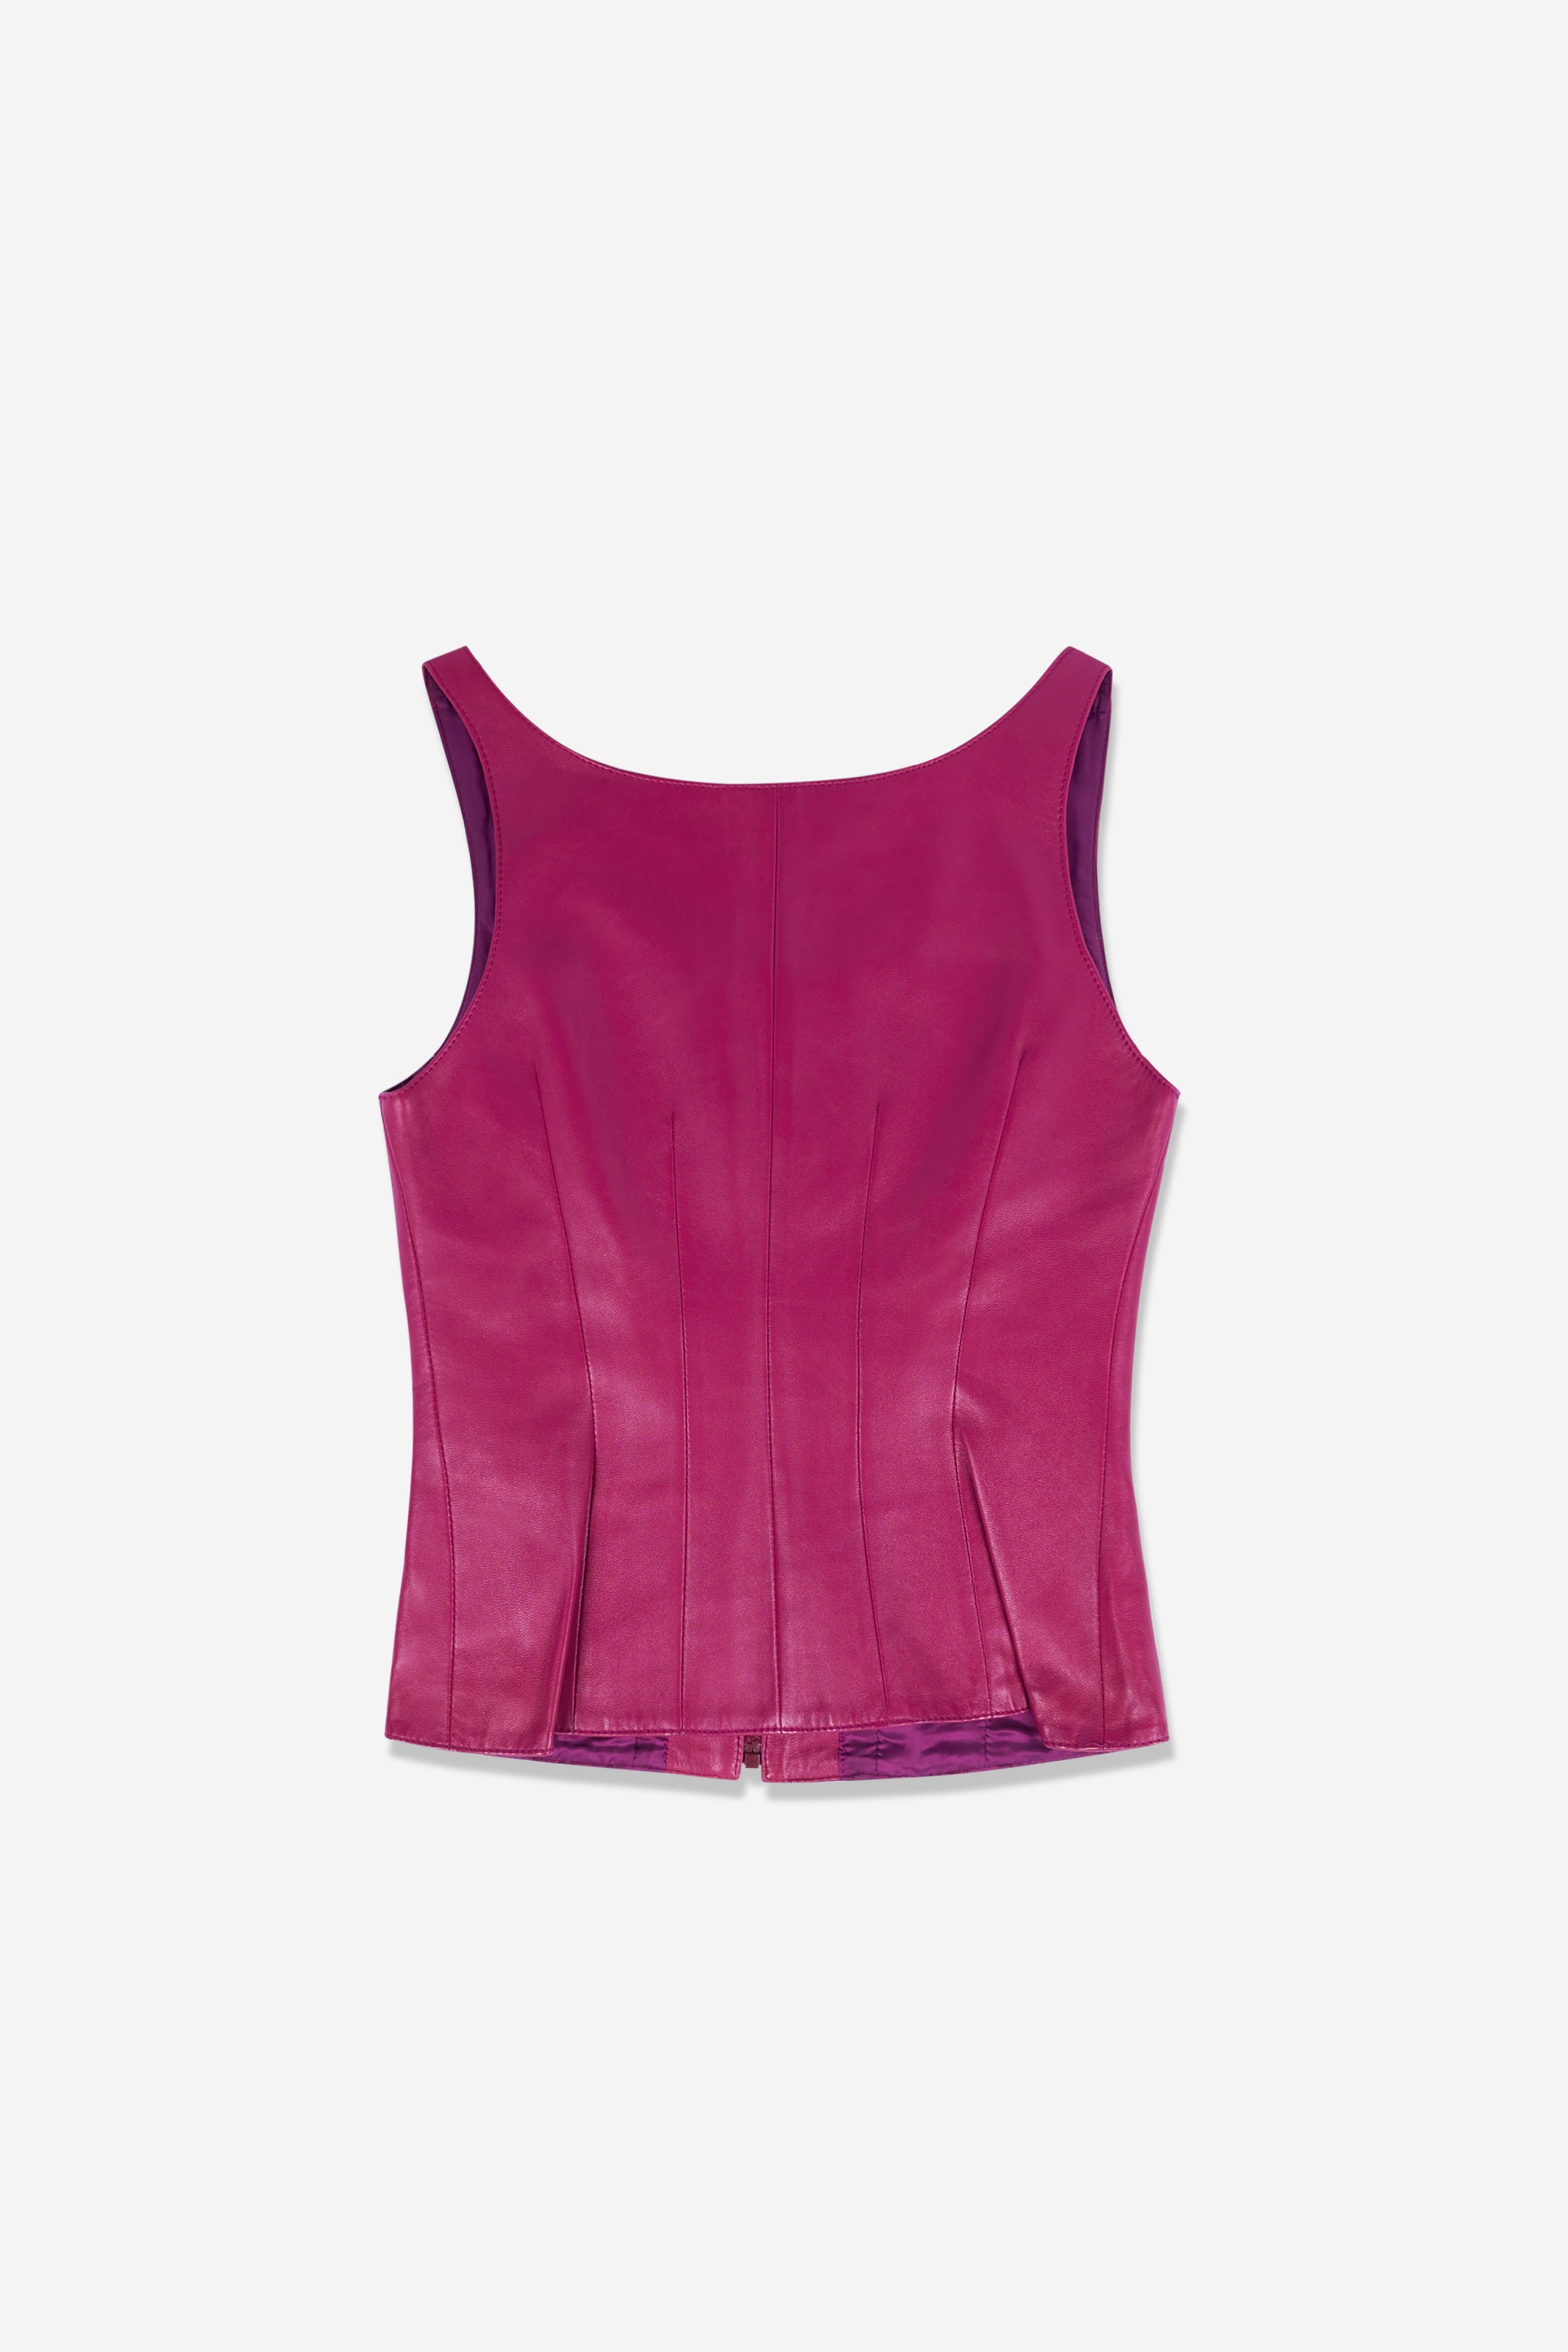 Pink leather top 